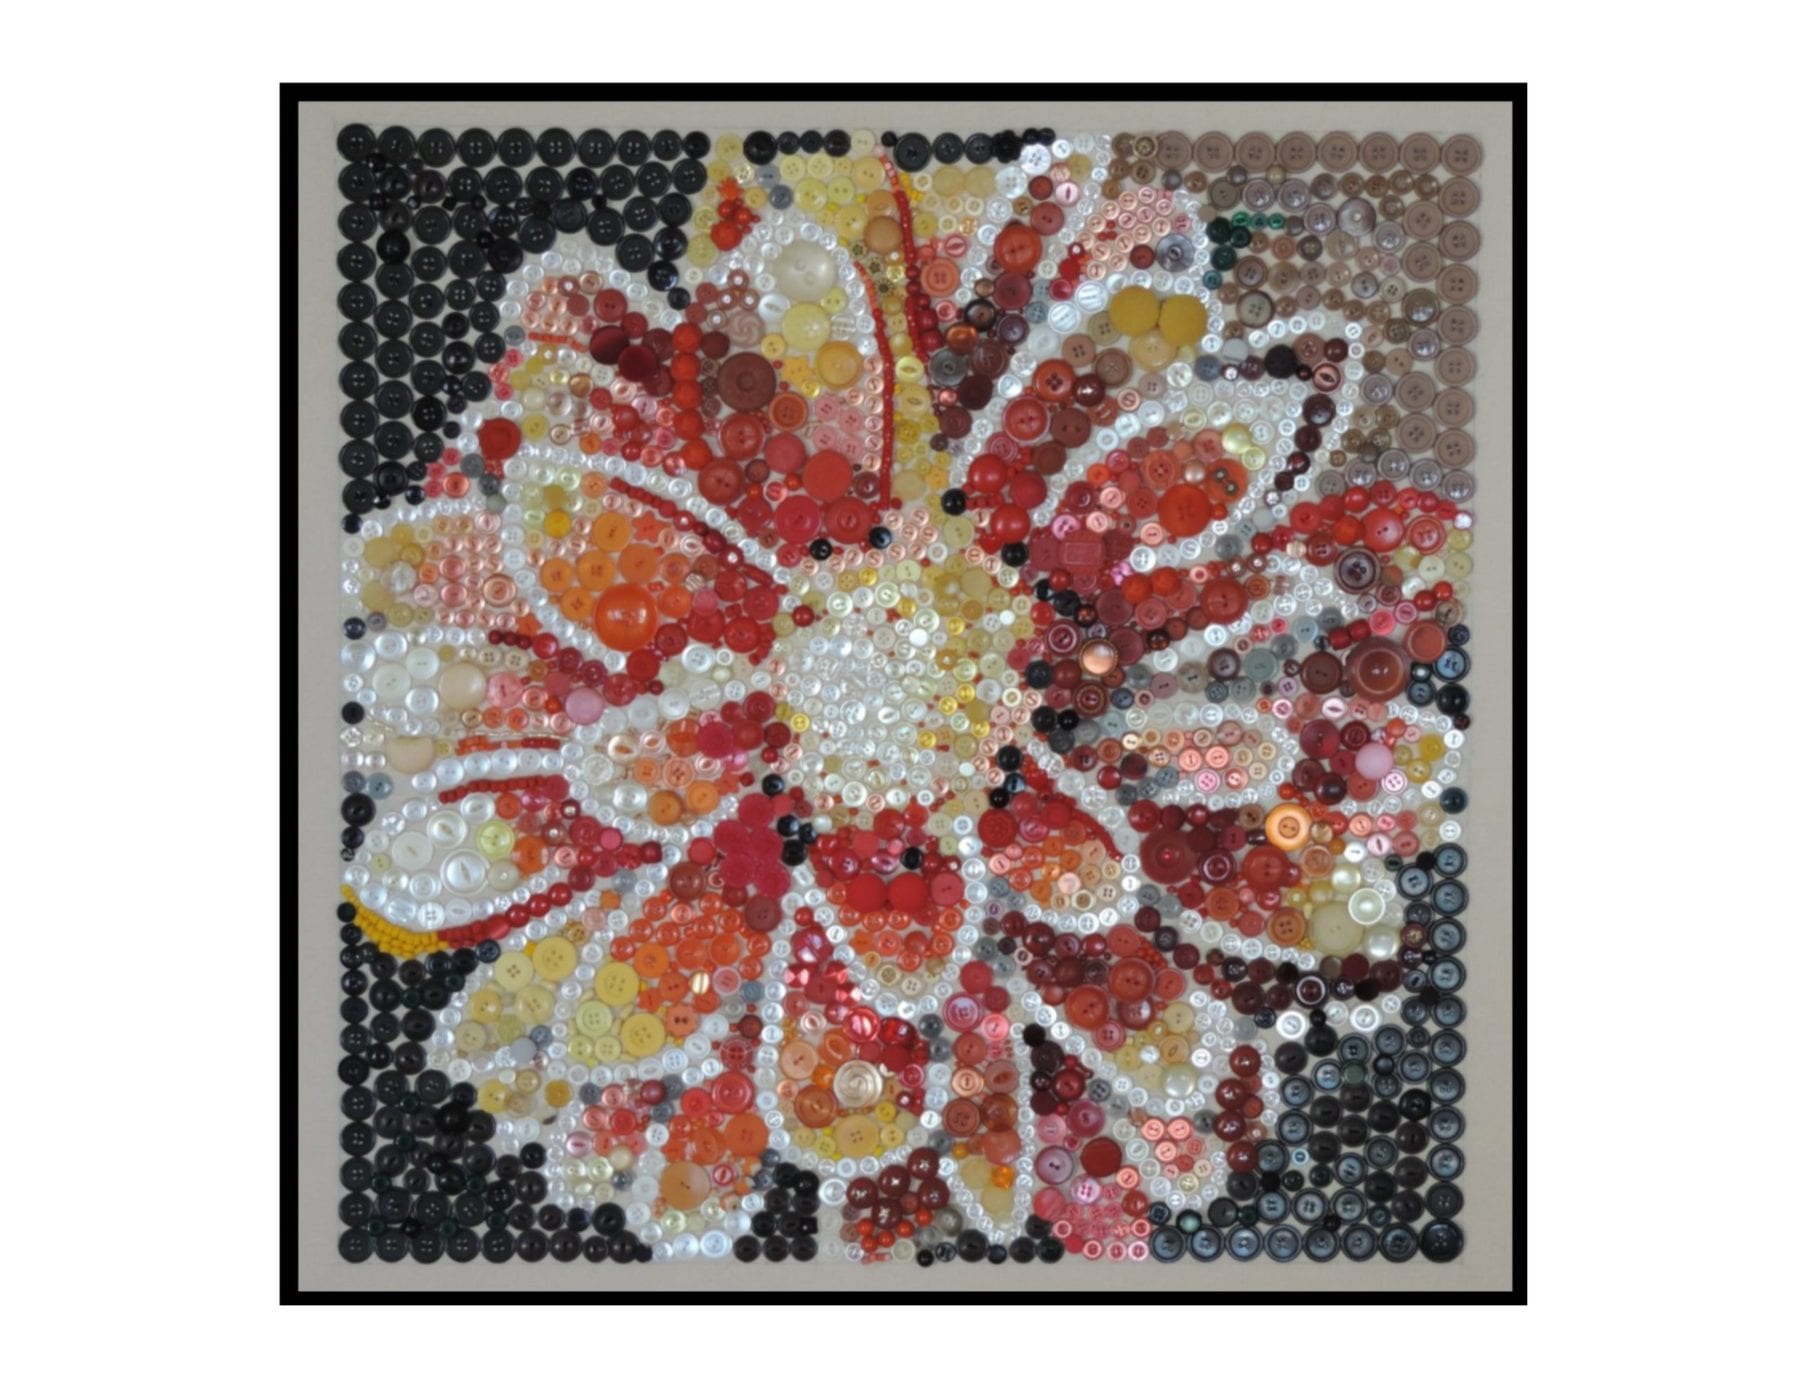 Helene is a visual artist currently working in mixed media, specifically mosaics created from recycled buttons and beads hand-sewn onto canvas. She has exhibited in venues including West Windsor Arts Center, Mercer County Artists, New Hope Arts Center, Artists of Yardley, Capital Health at Hopewell, and others.